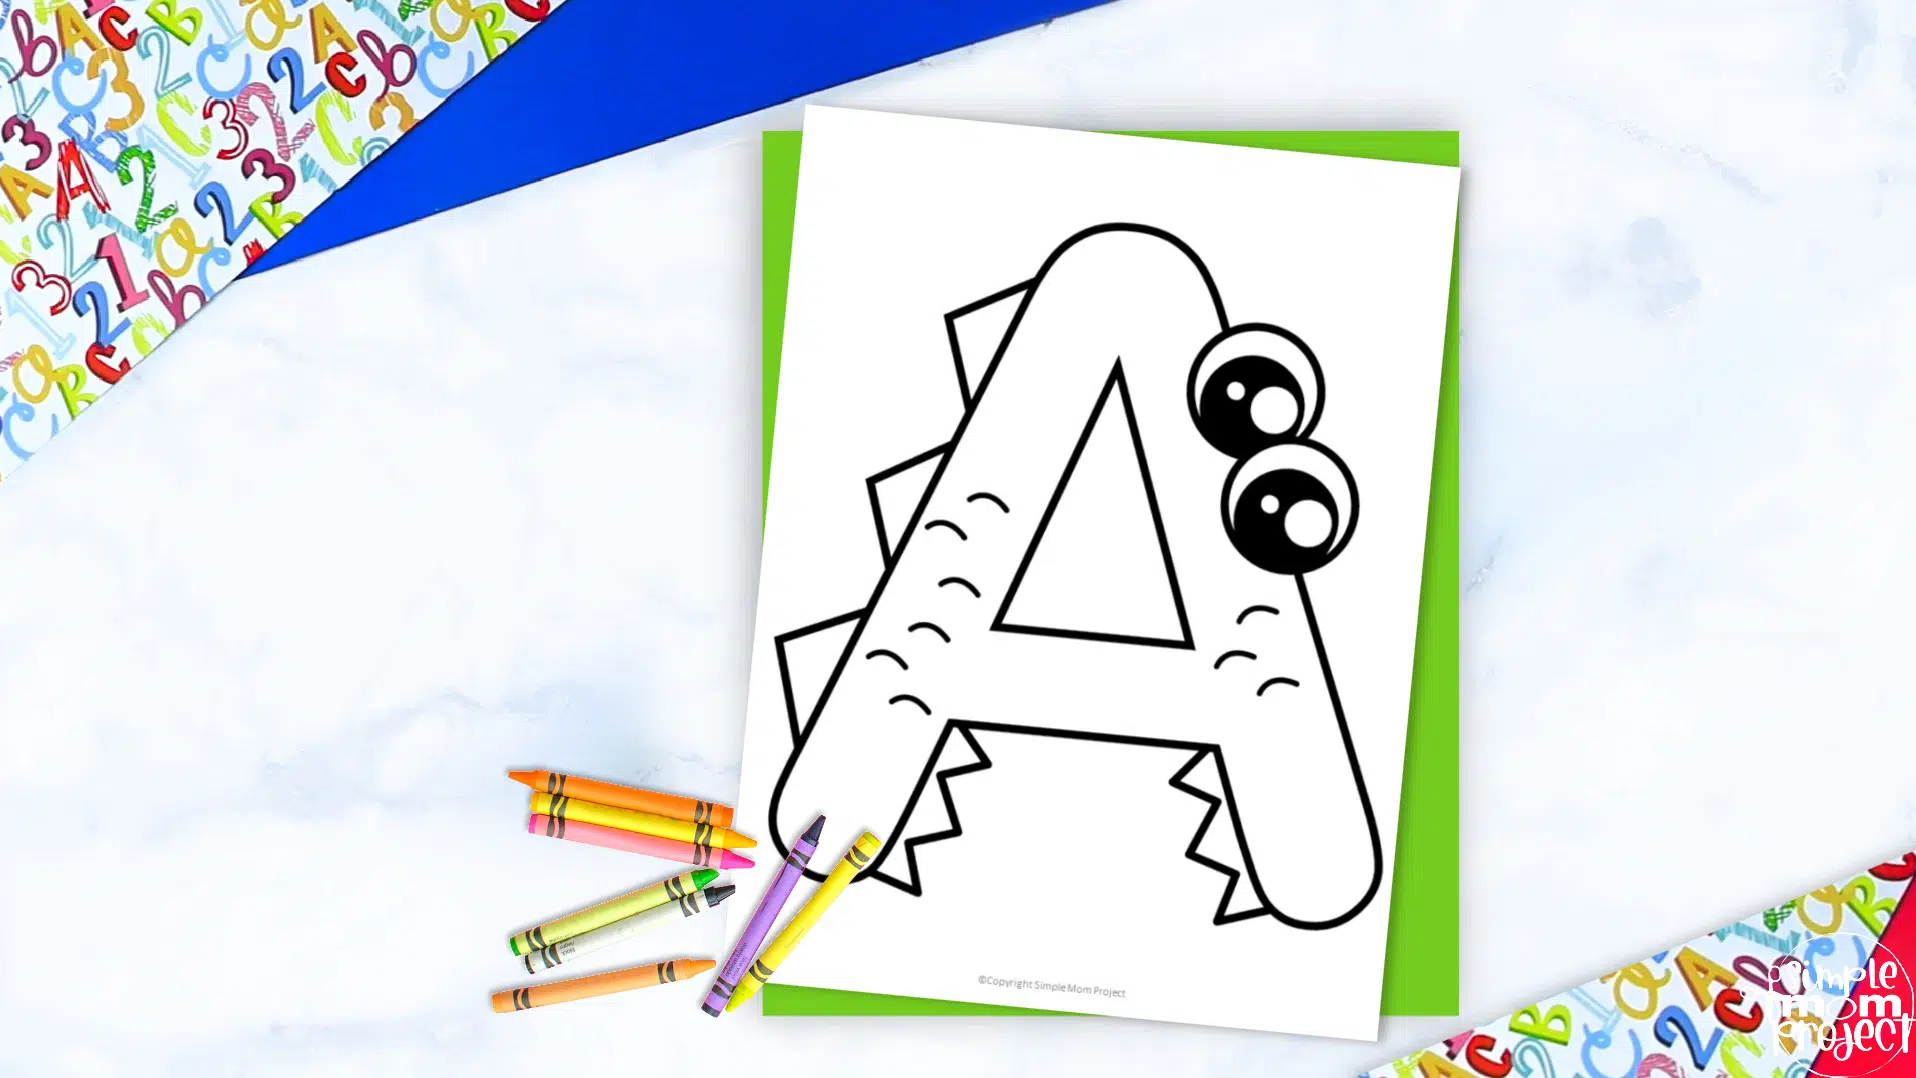 Fun printable alphabet coloring pages â simple mom project